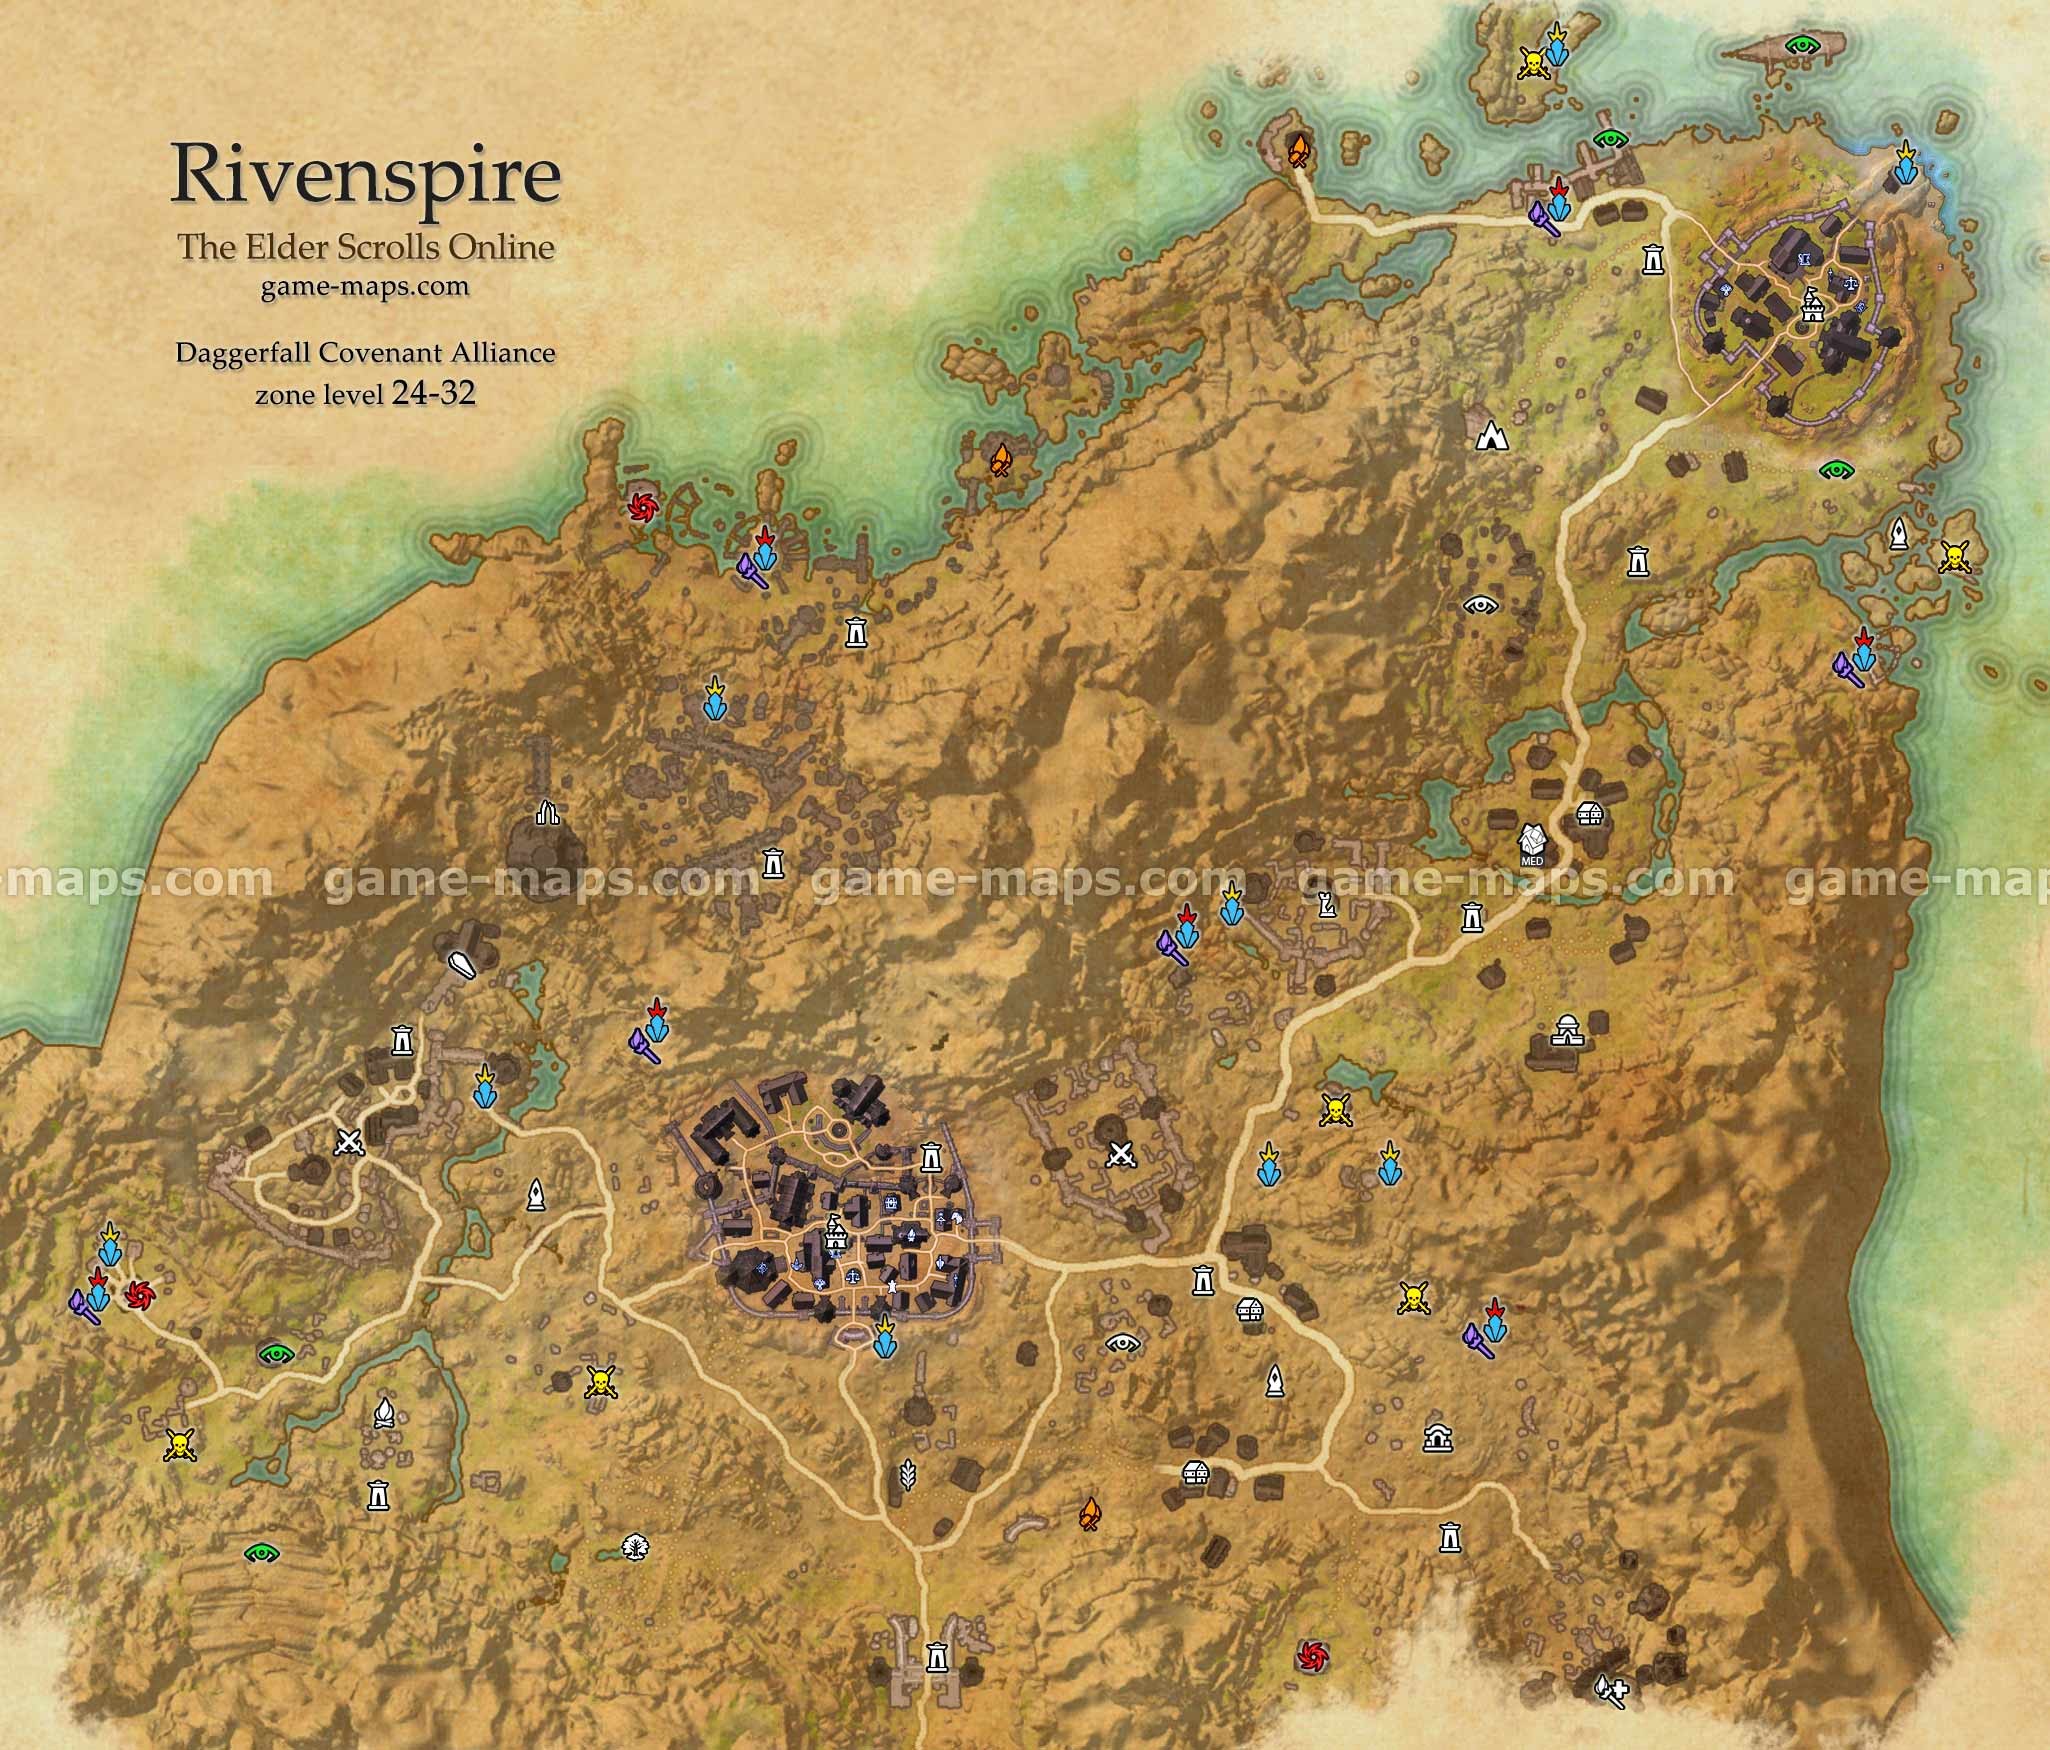 2050x1750 Rivenspire zone map. Shornhelm, North Point. Rivenspire is a region in  northern part